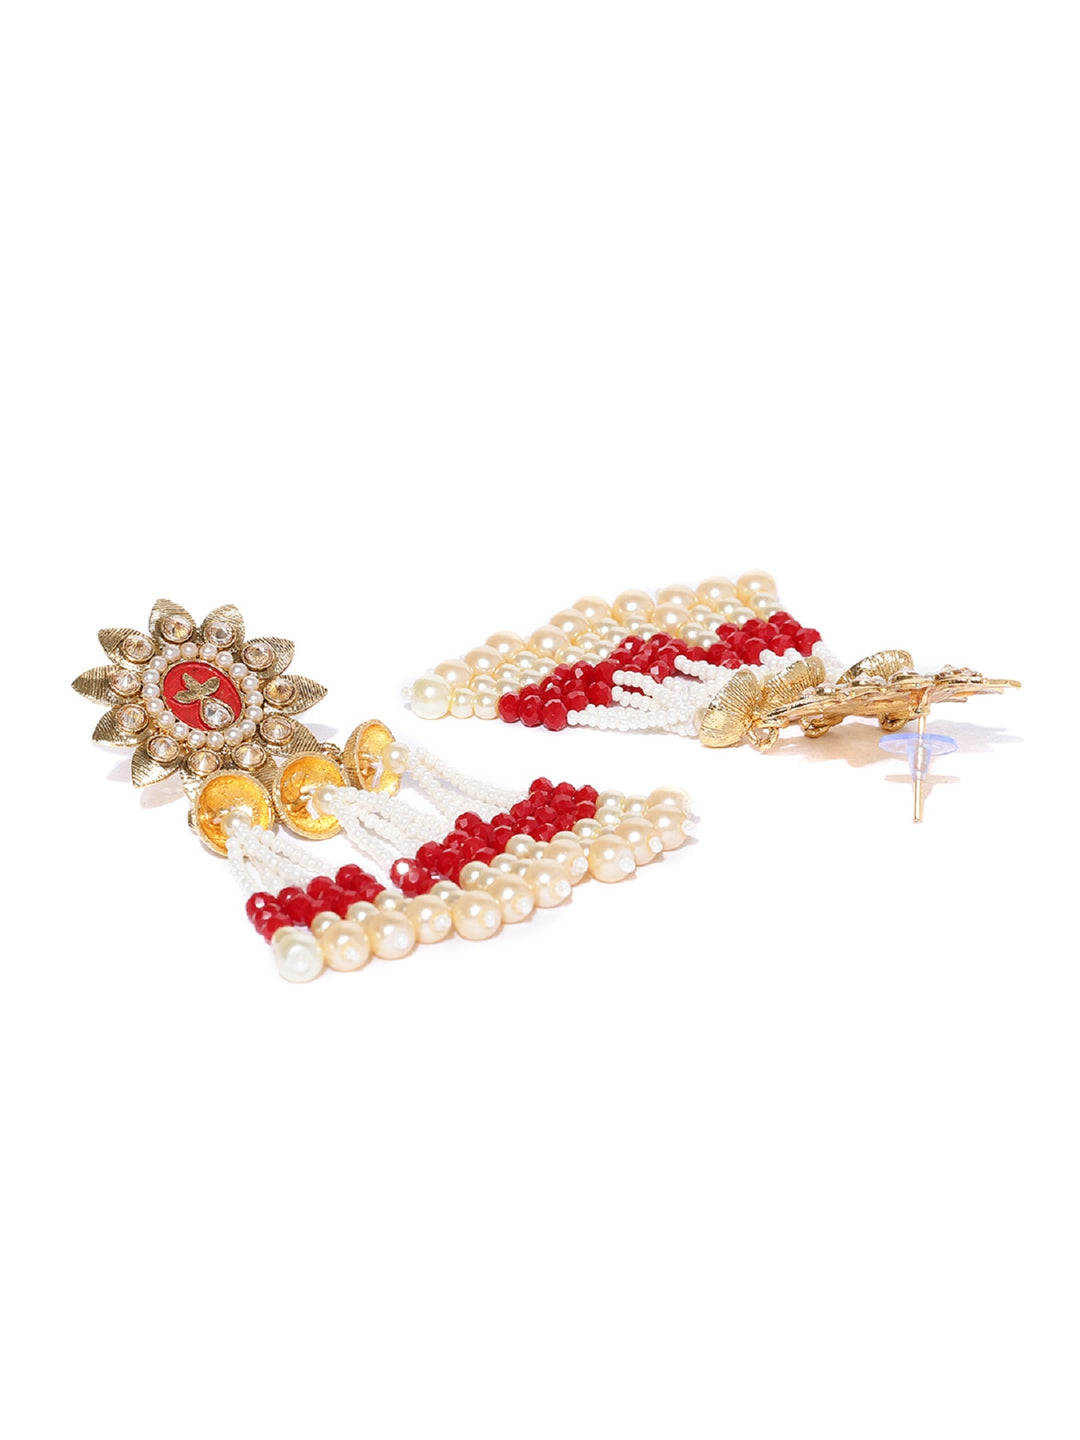 Floral Gold Plated Maroon Drop Earrings With Hanging Beads And Pearls For Women